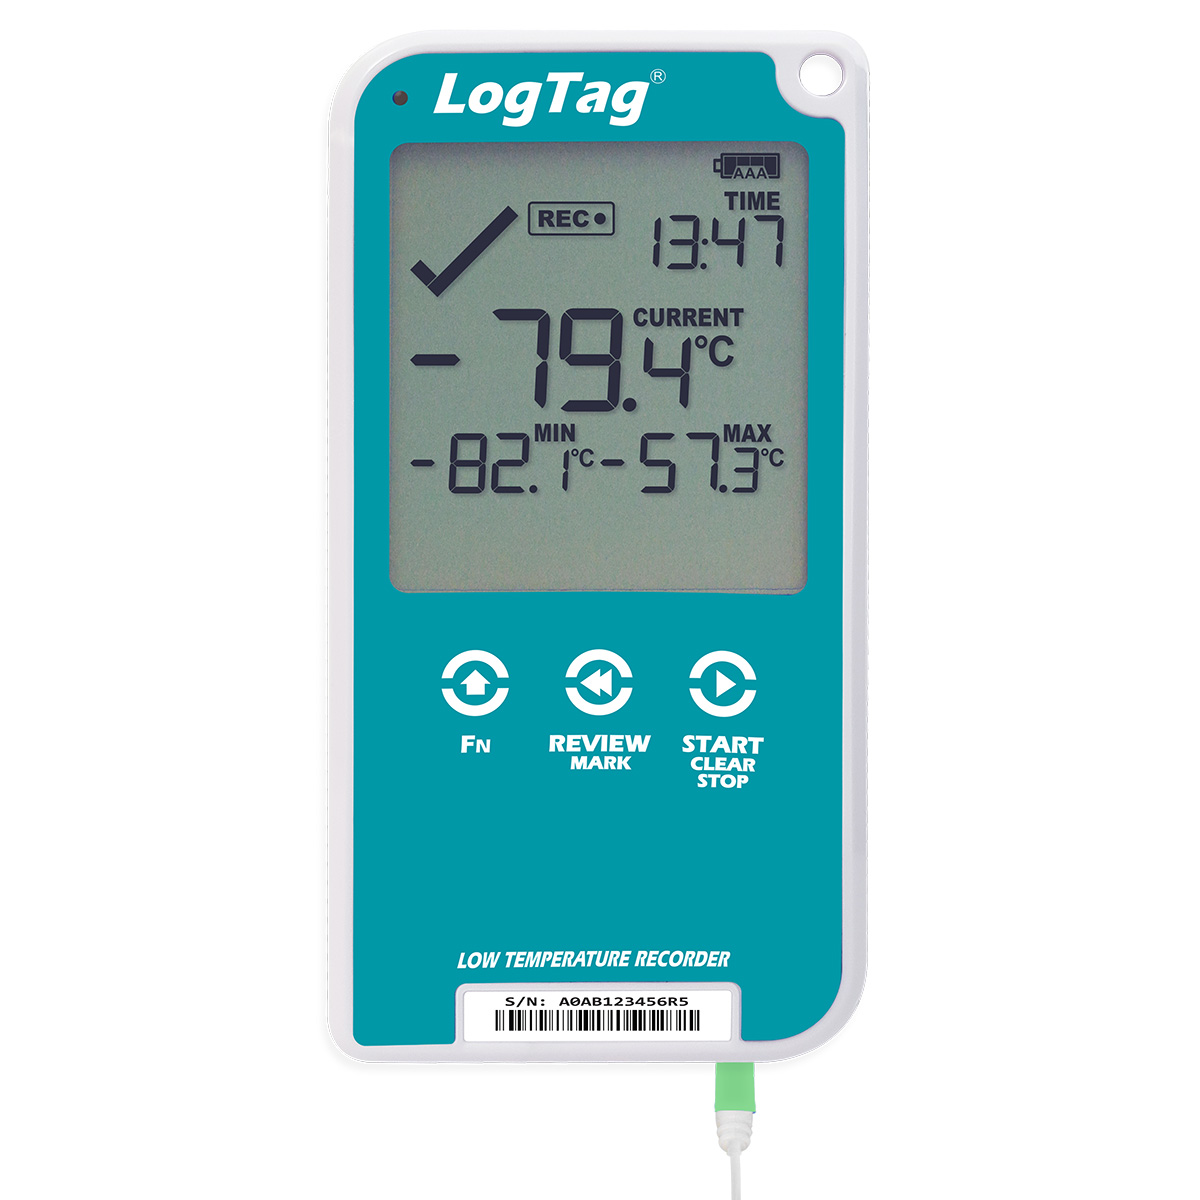 LogTag thermometer data logger